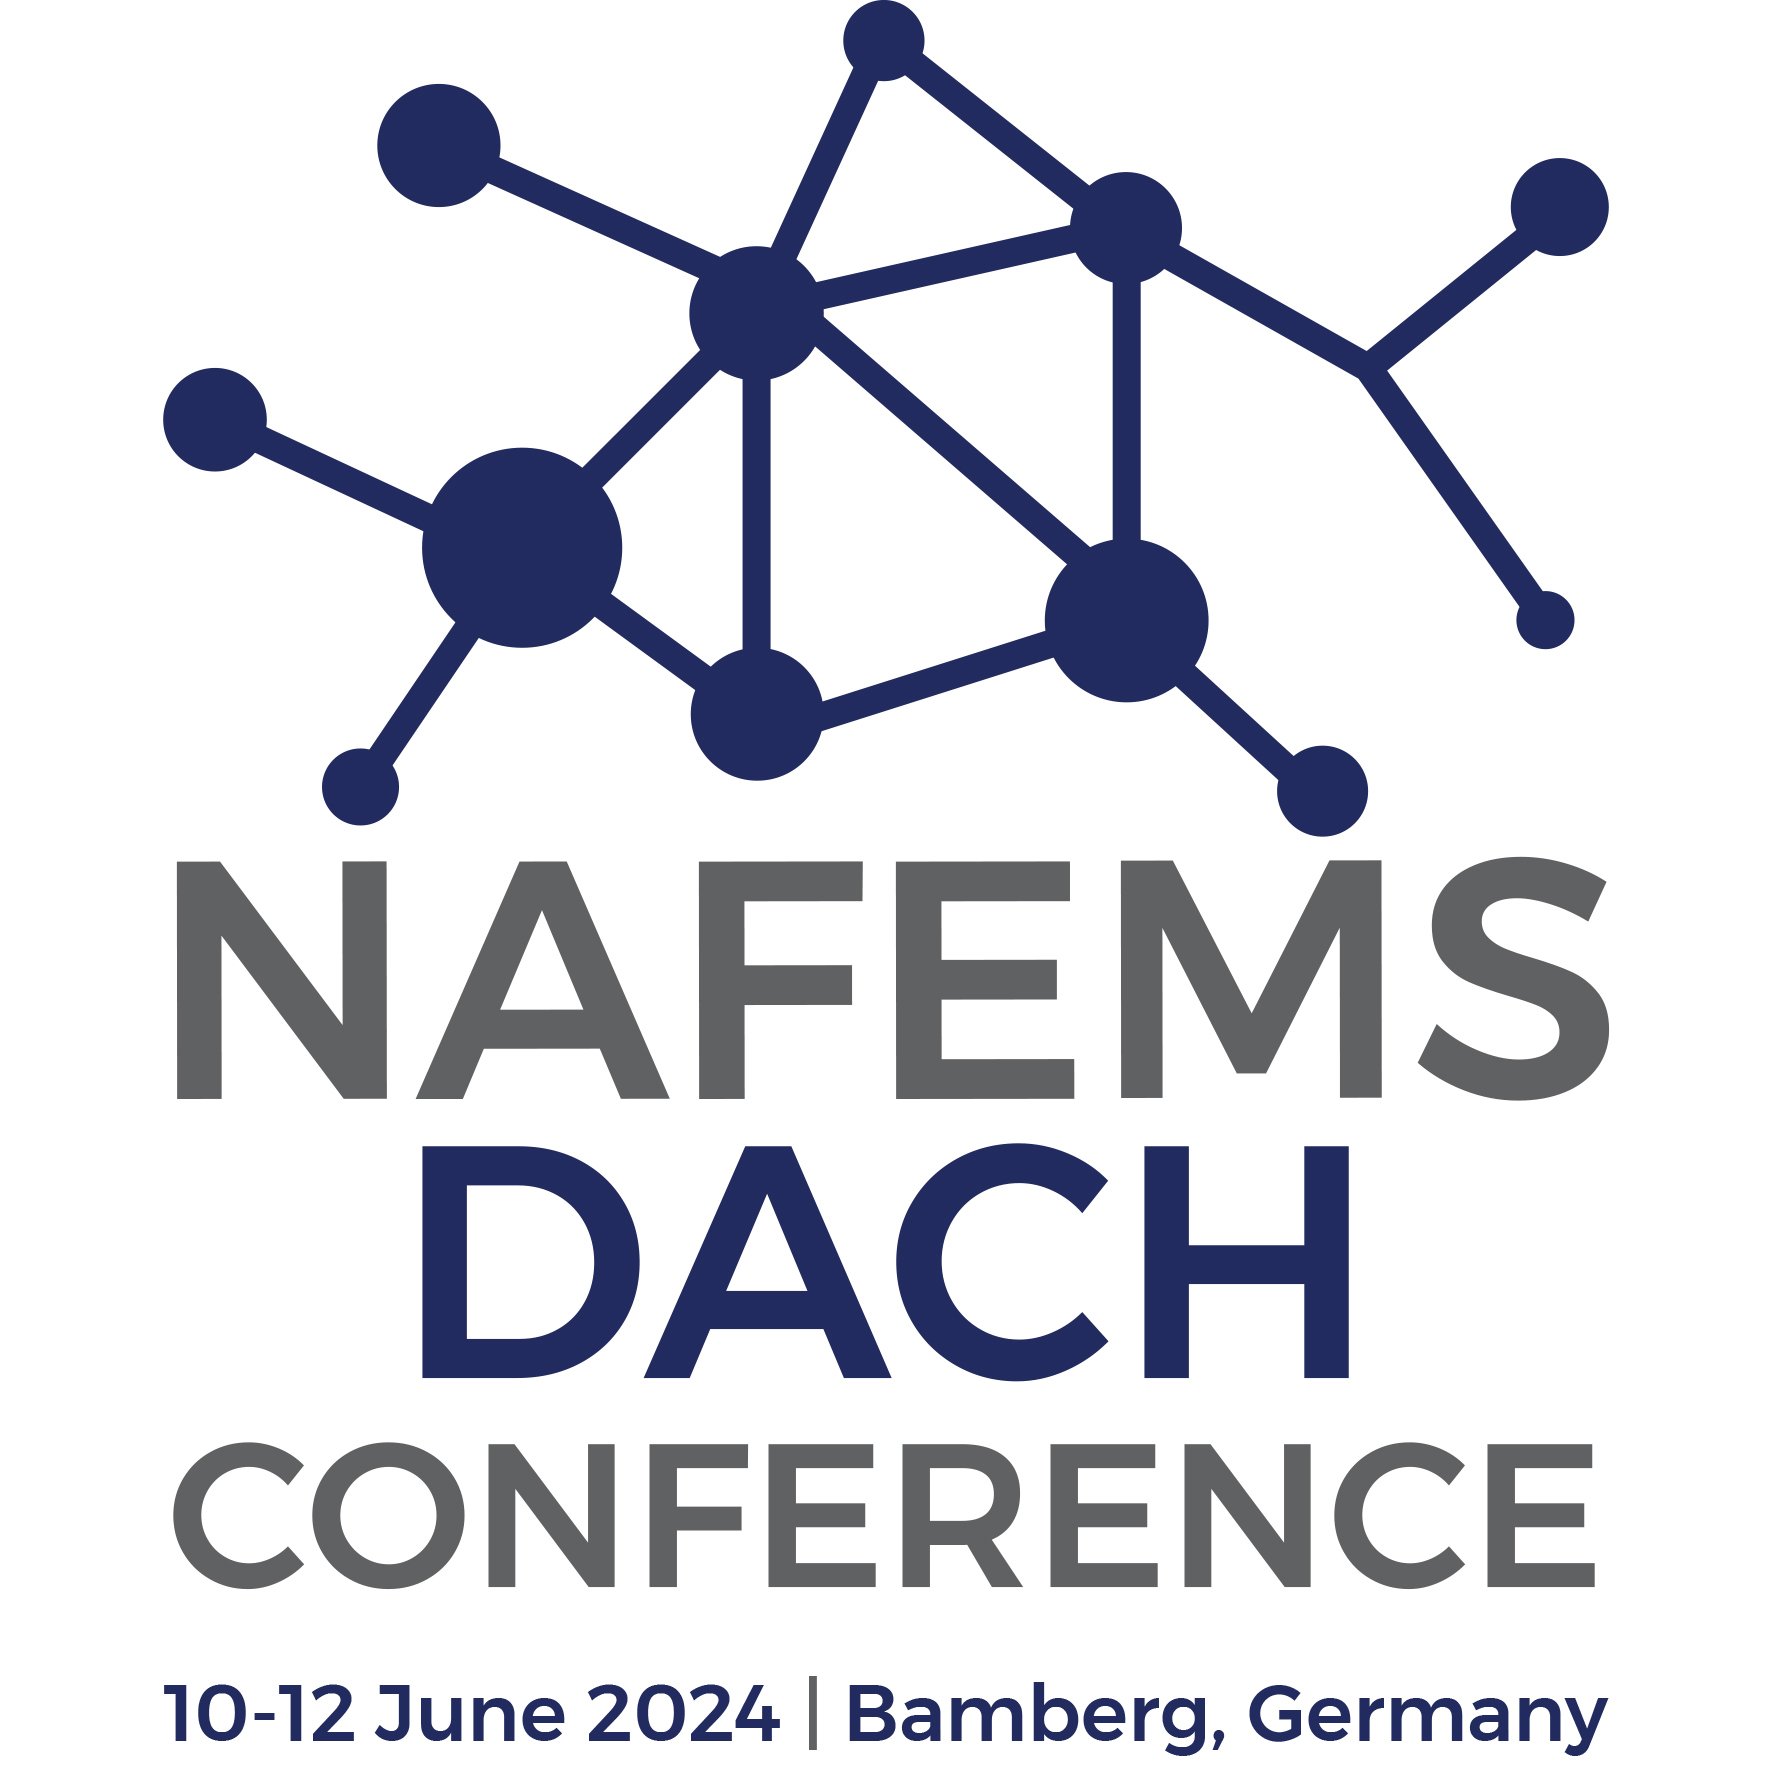 NAFEMS DACH Conference 2024